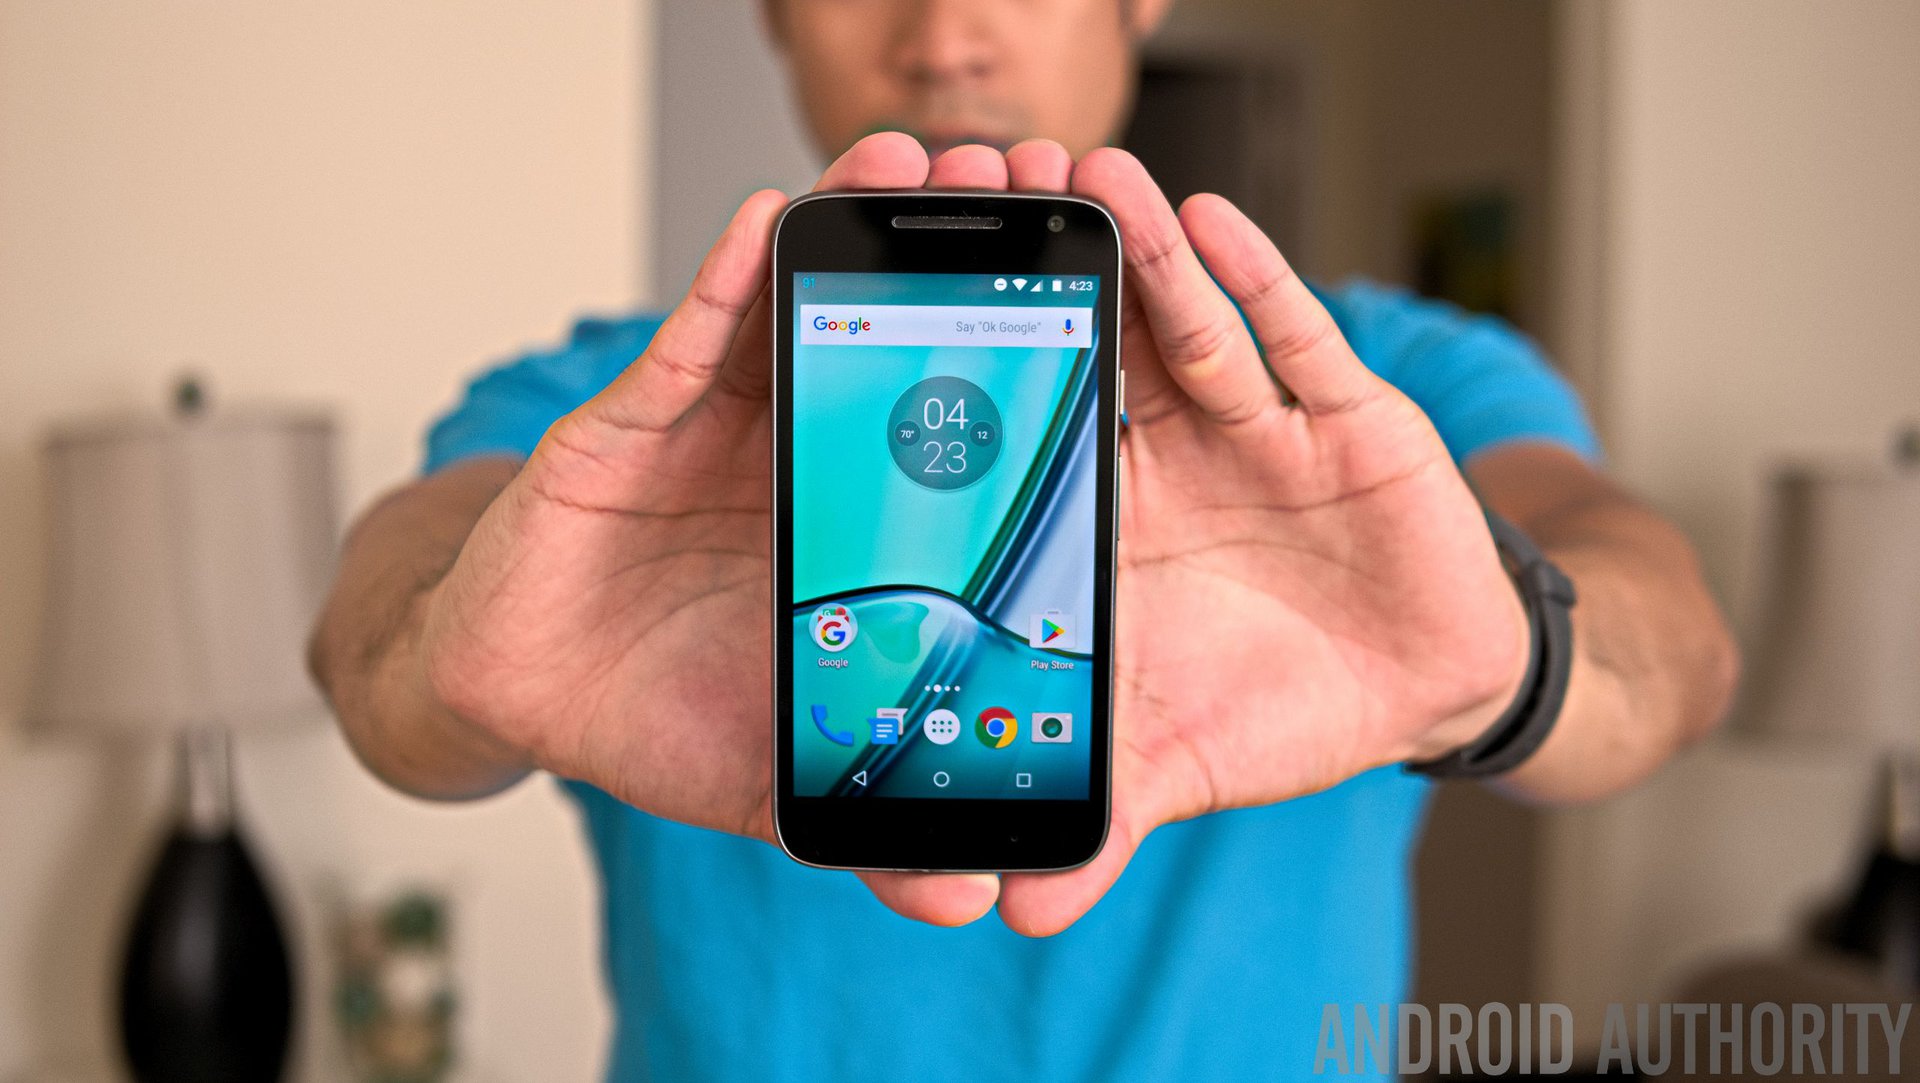 Motorola Moto G4 Play review: Our second-favorite super-budget